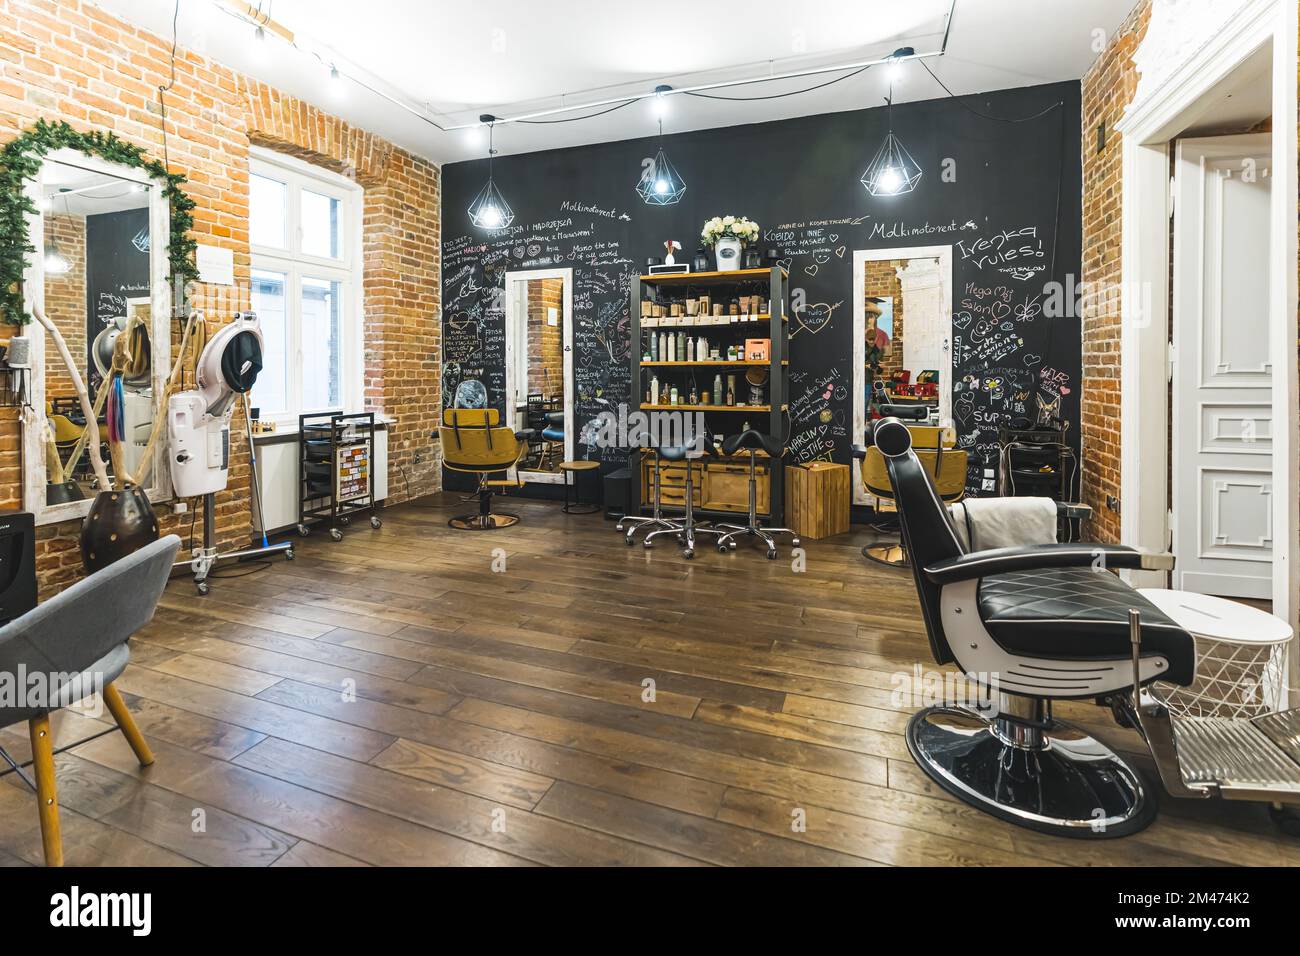 Industrial hairdresser's salon. Full indoor shot with no people. Stylish interior of small haircut business. High quality photo Stock Photo